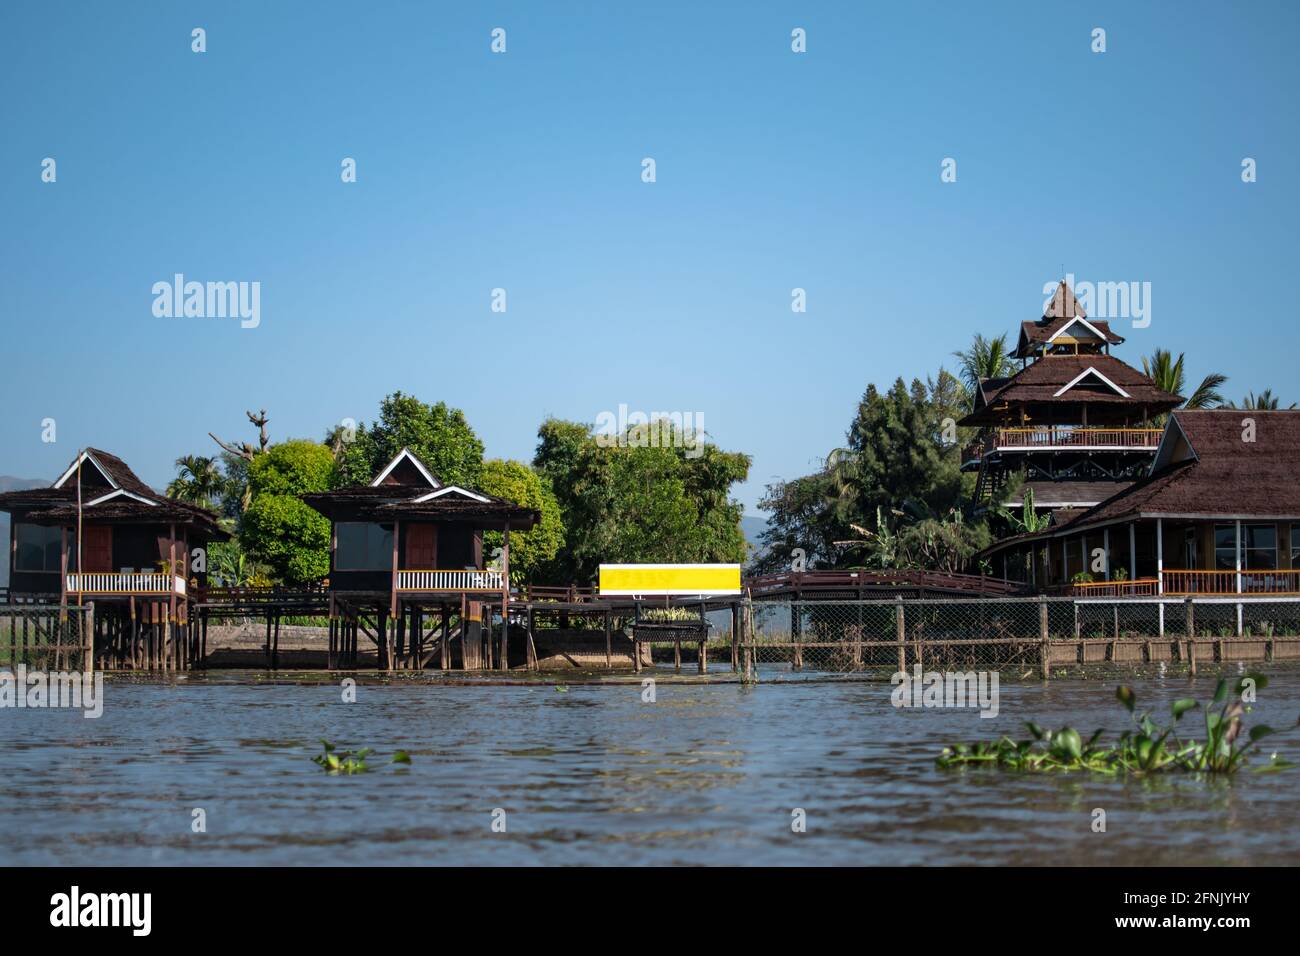 Red elevated buildings by the riverside of the canals at Inle Lake, Nyaung Shwe, Shan state, Mayanmar Stock Photo